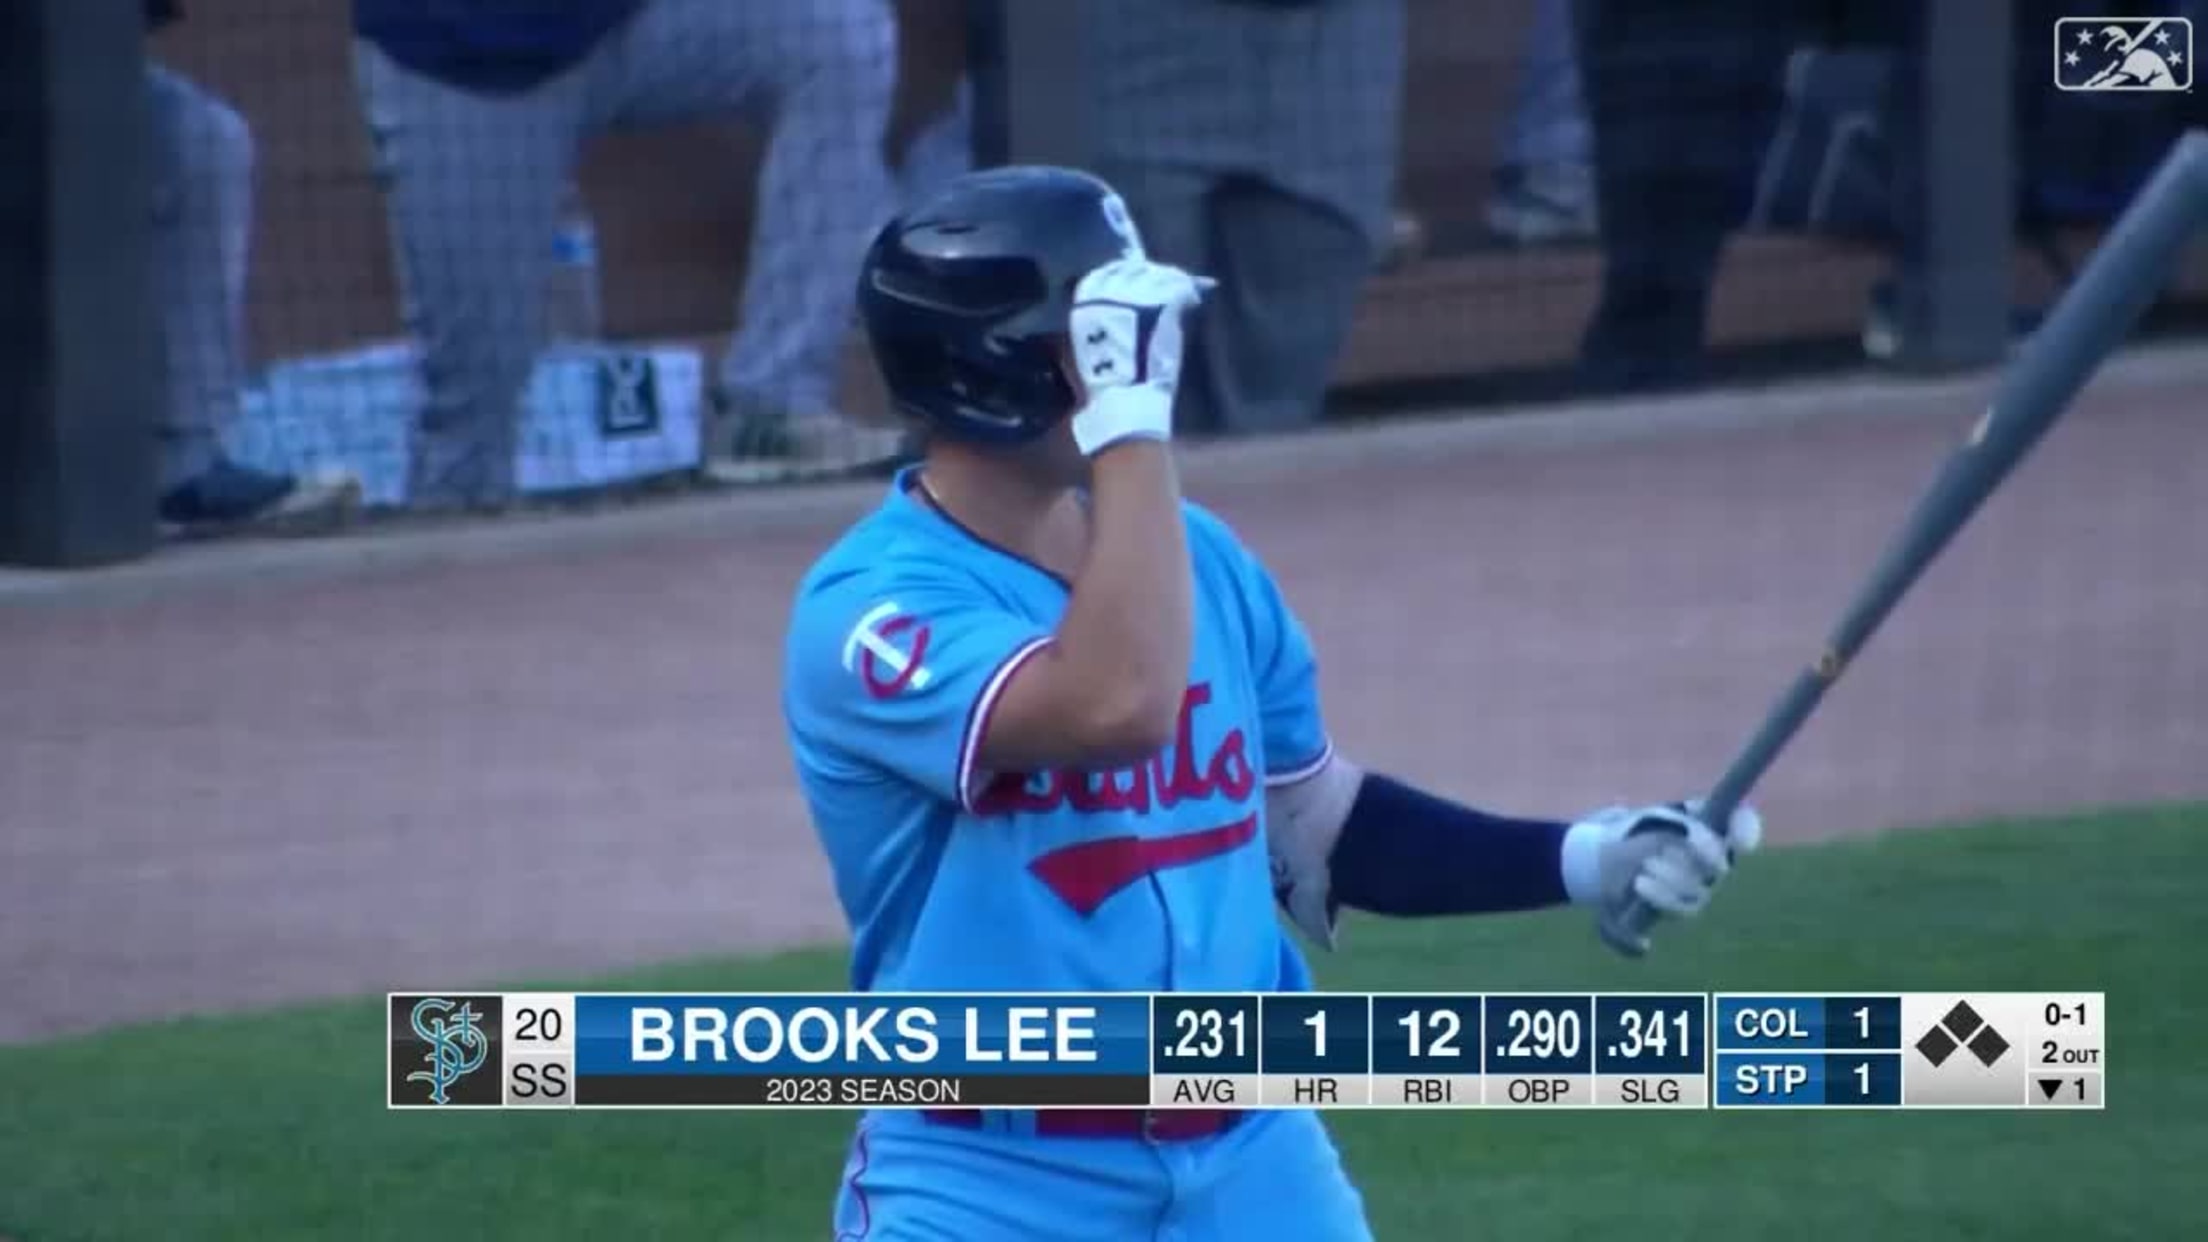 Brooks Lee's four hit game